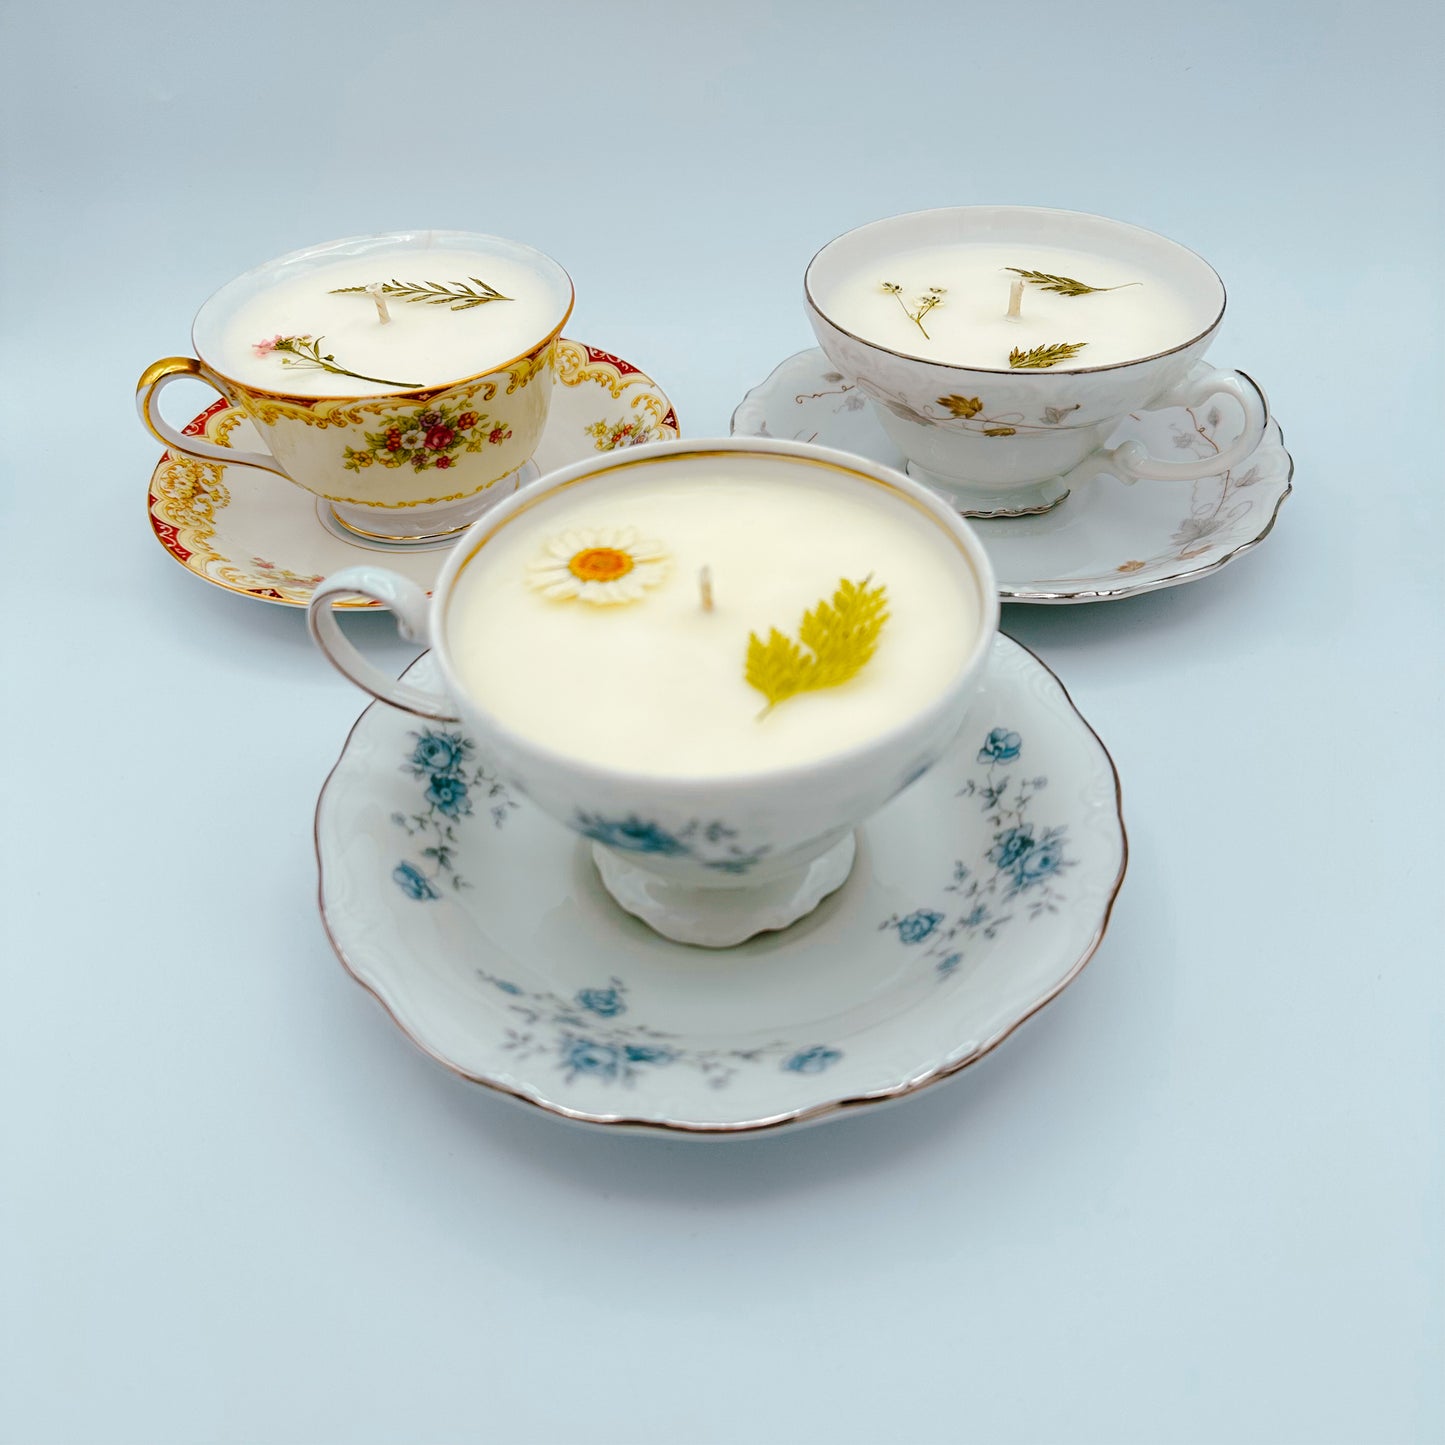 Specialty Teacup Candle